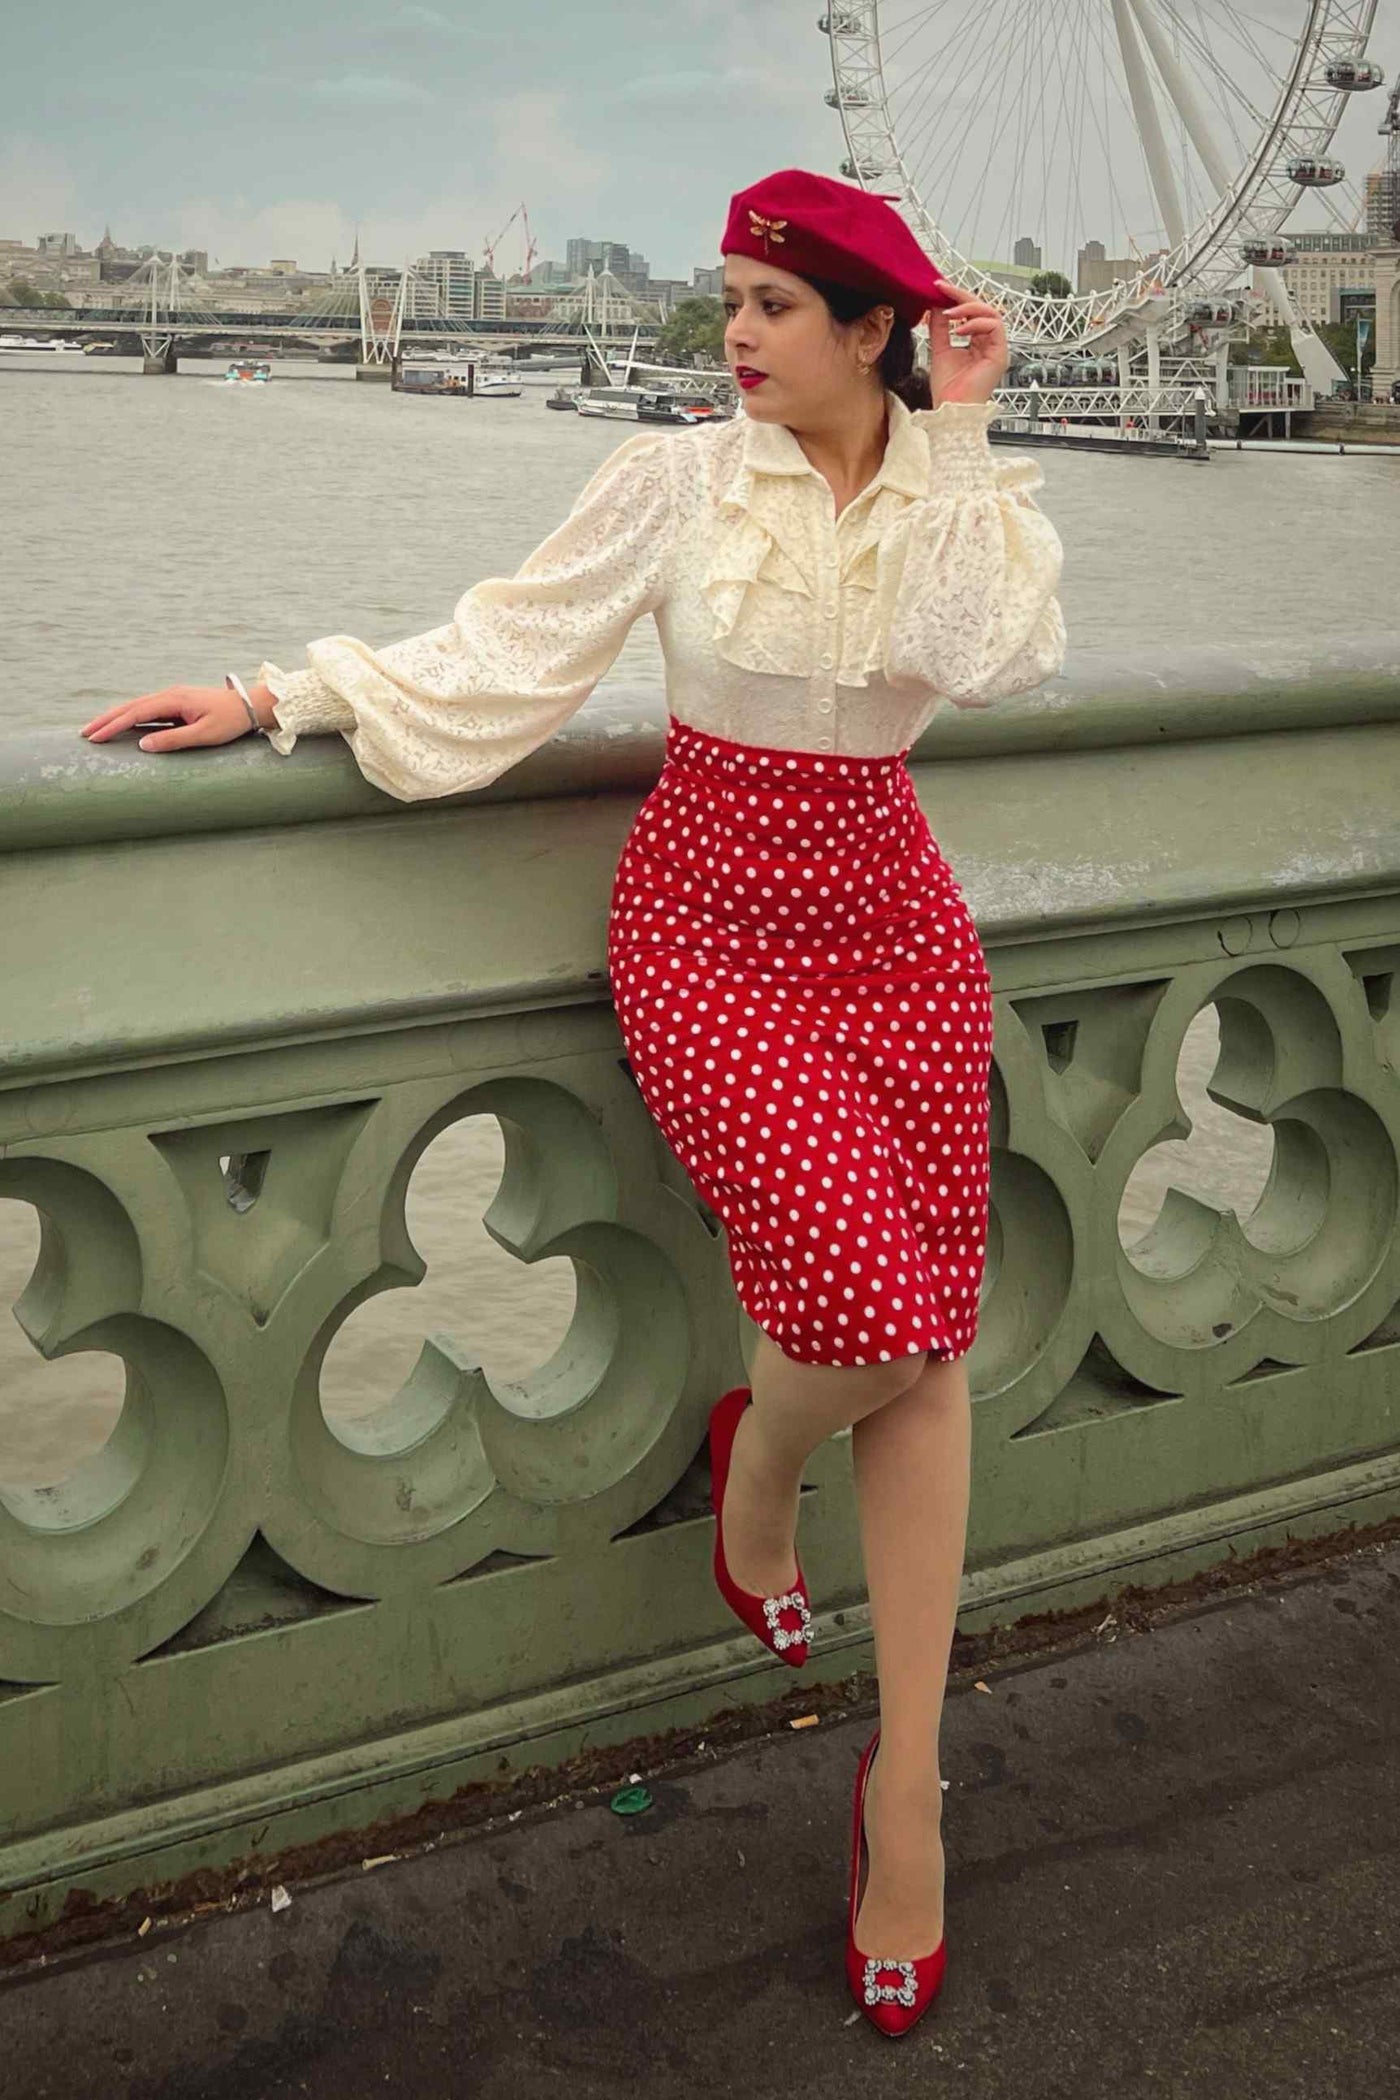 Woman wearing our red and white polka dot pencil skirt, with matching accessories and top, on a bridge in London